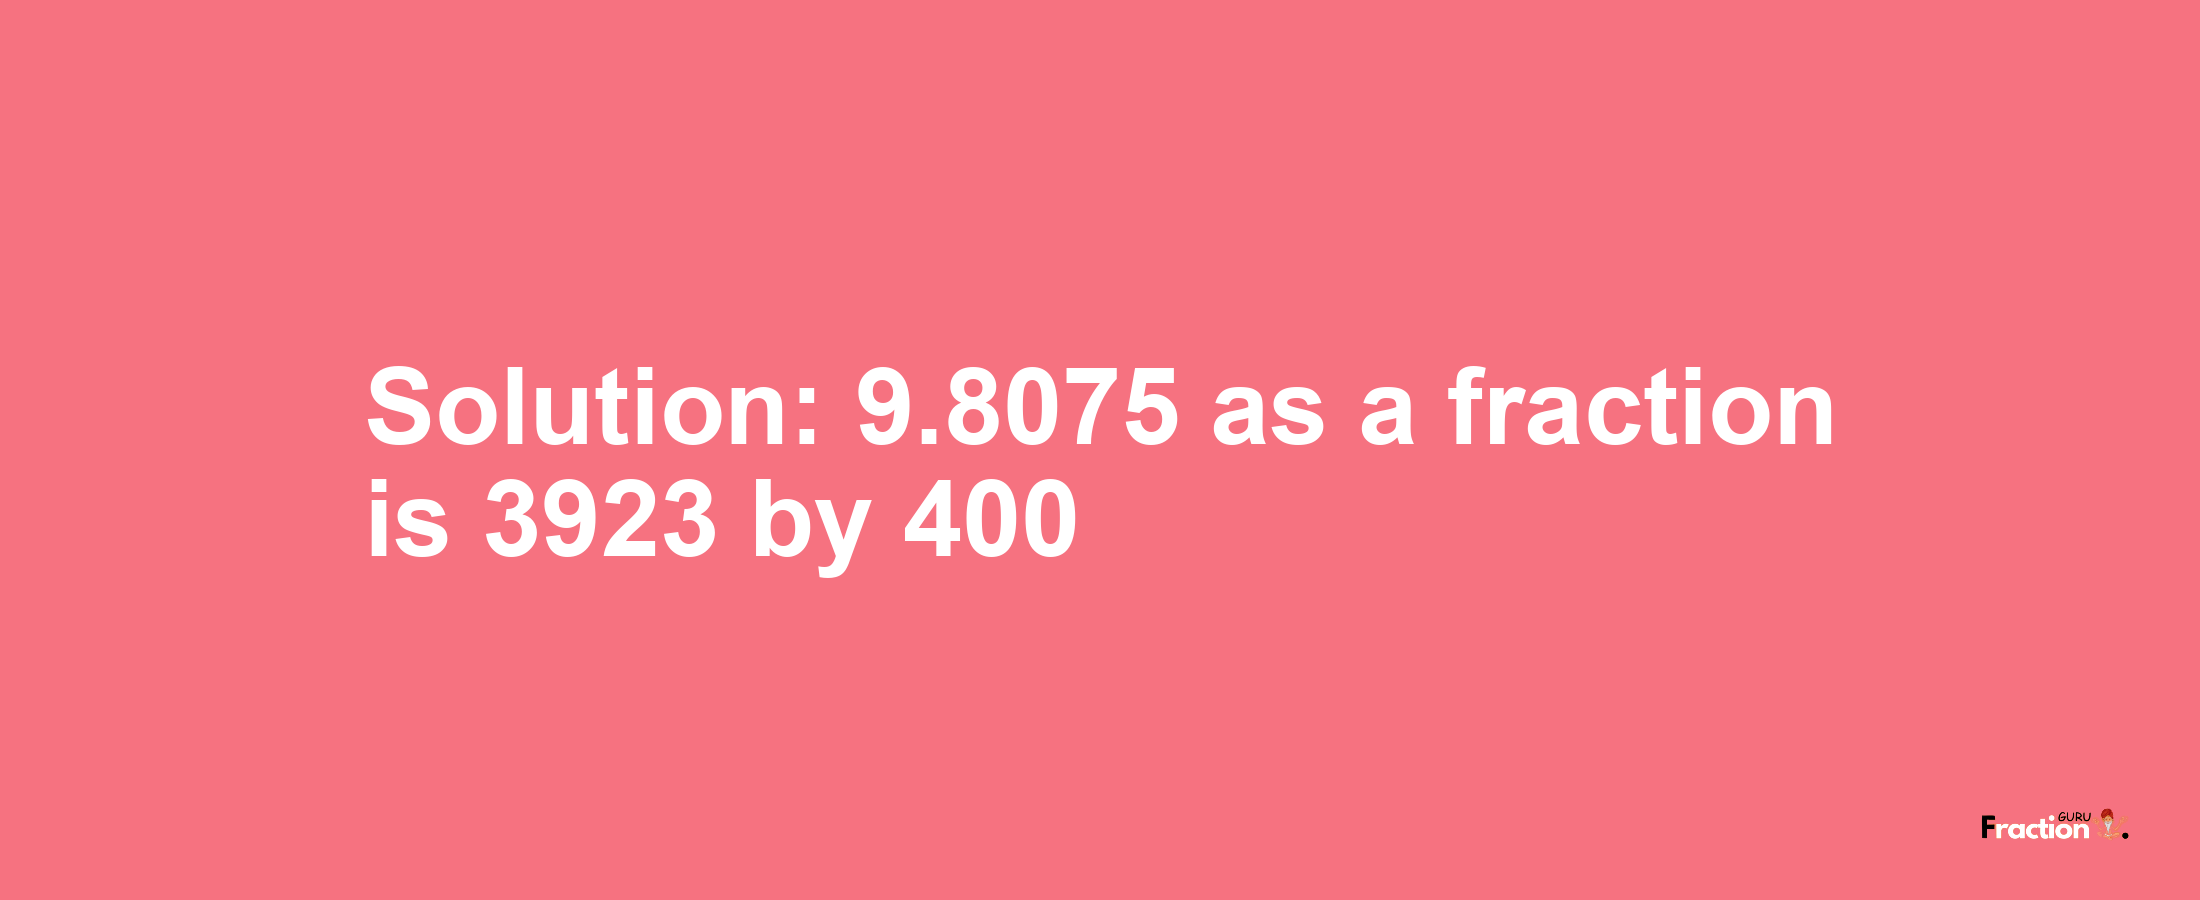 Solution:9.8075 as a fraction is 3923/400